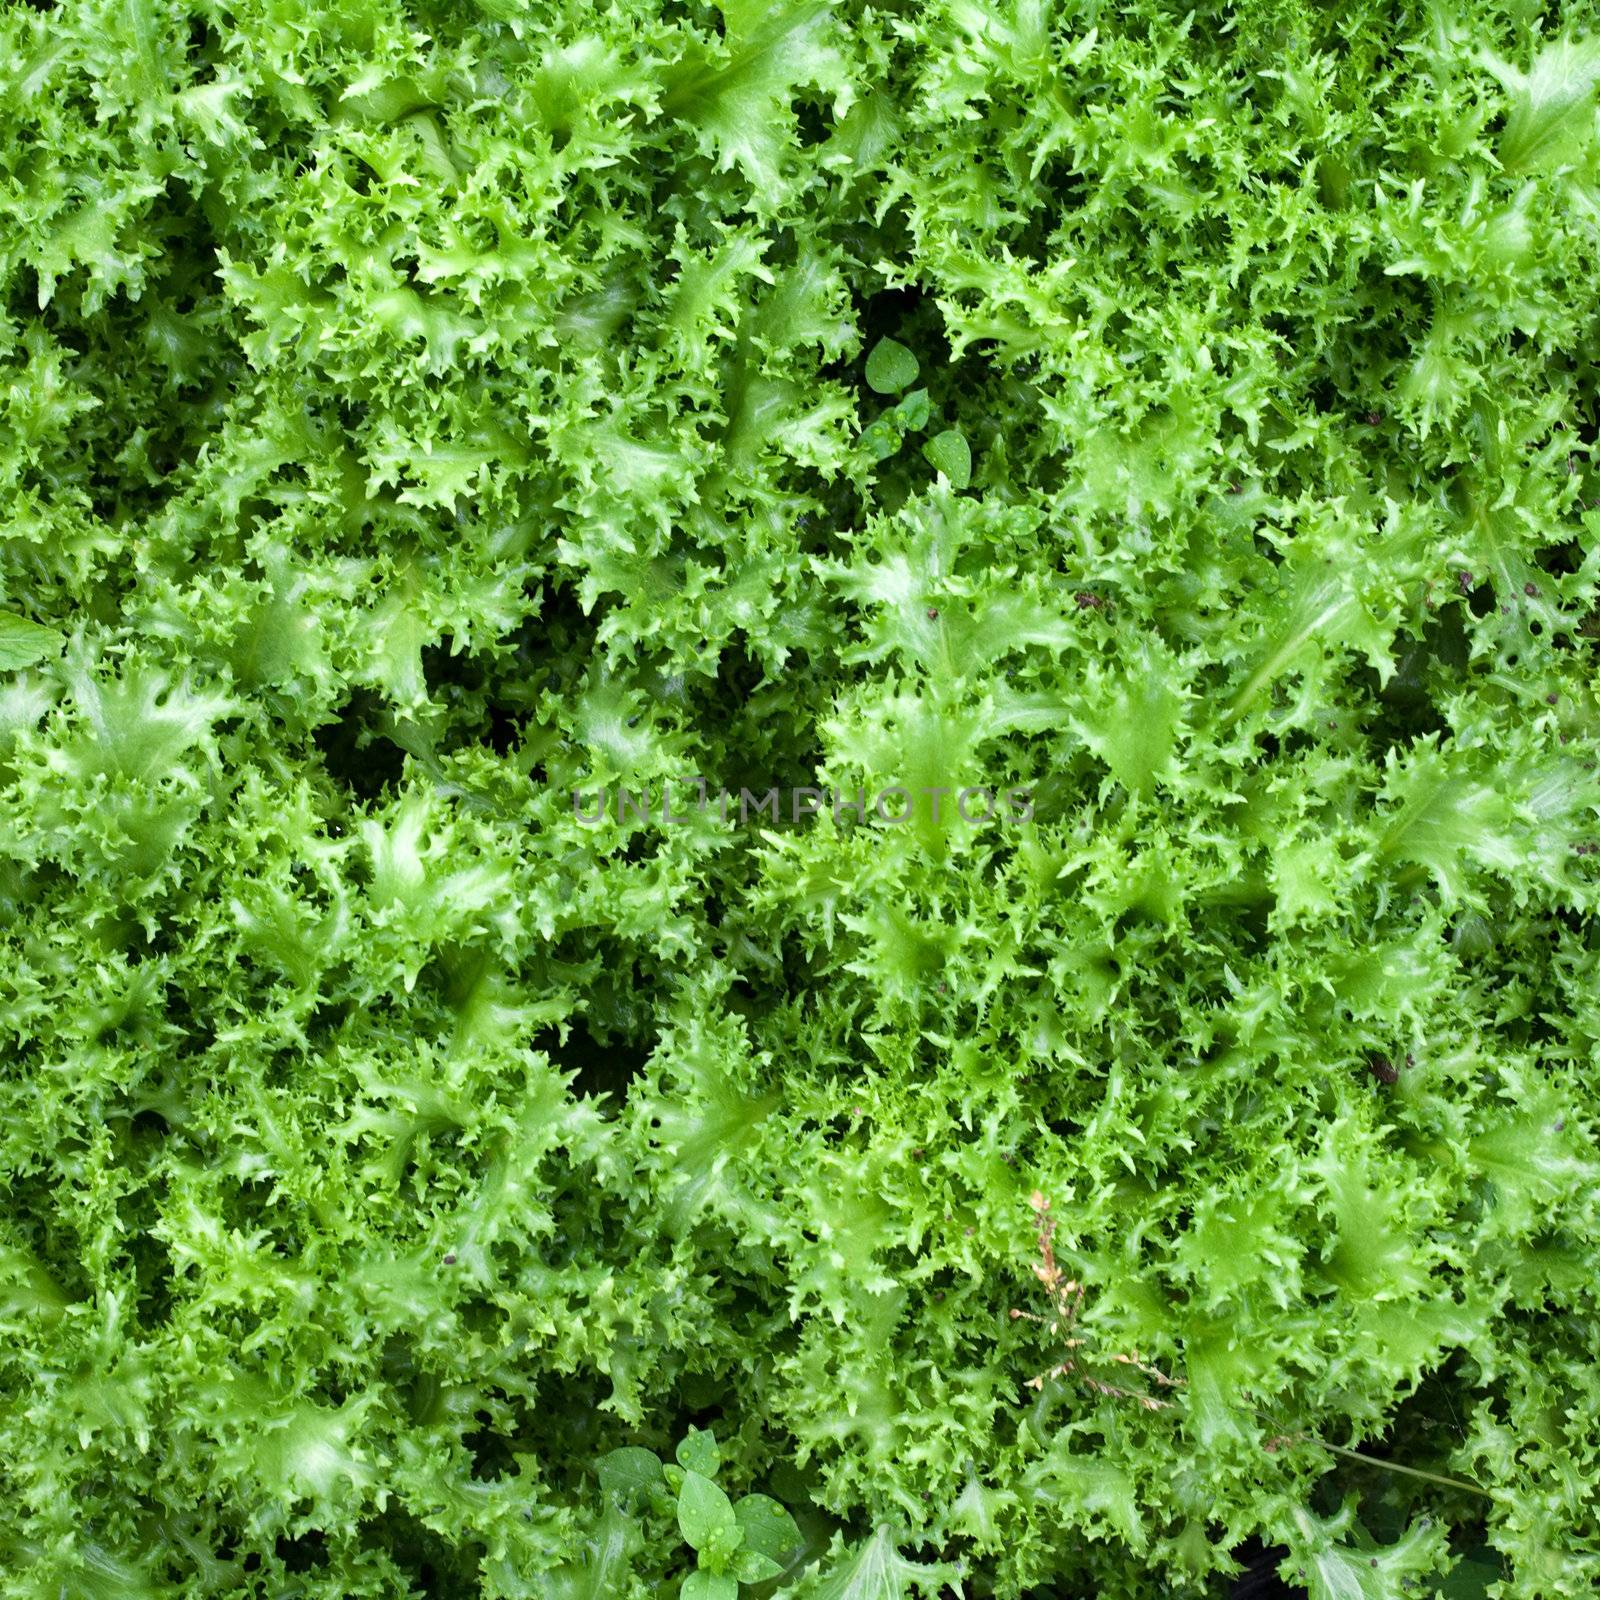 An image of healthy food: green lettuce